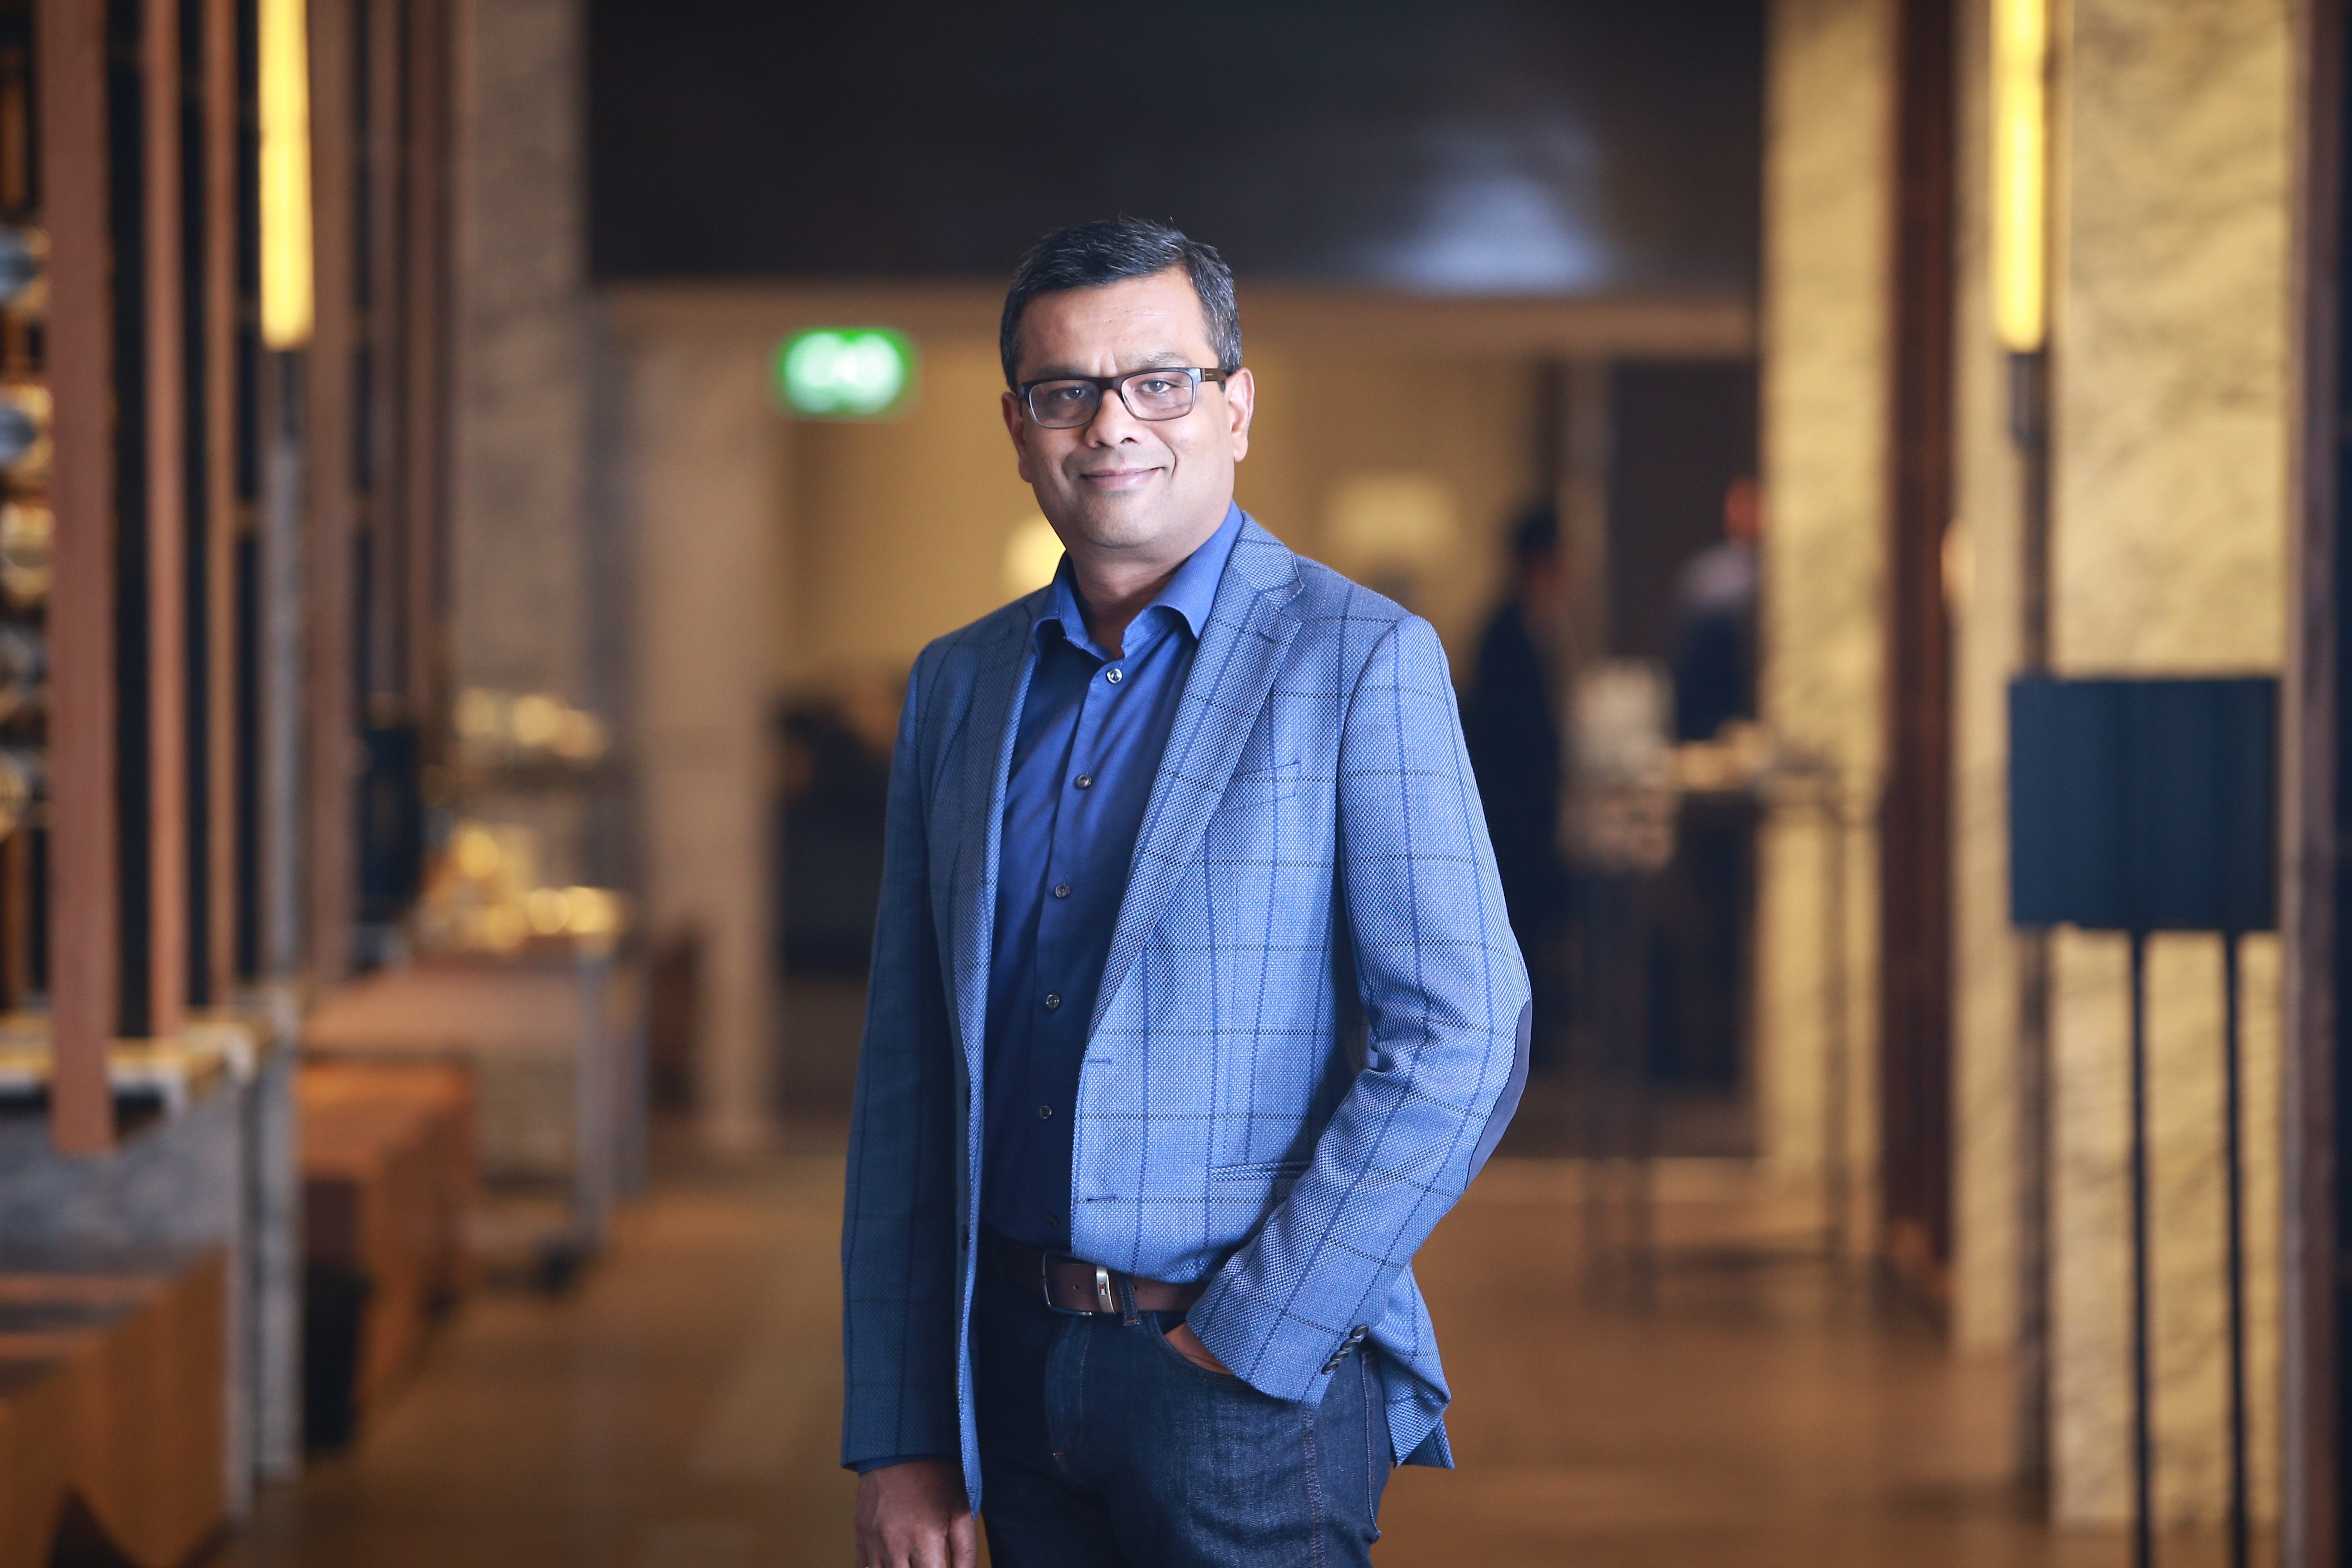 Nitin Bansal, <span>Managing Director, Ericsson India and Head of Network Solutions, Southeast Asia, Oceania and India <br> Ericsson</span>